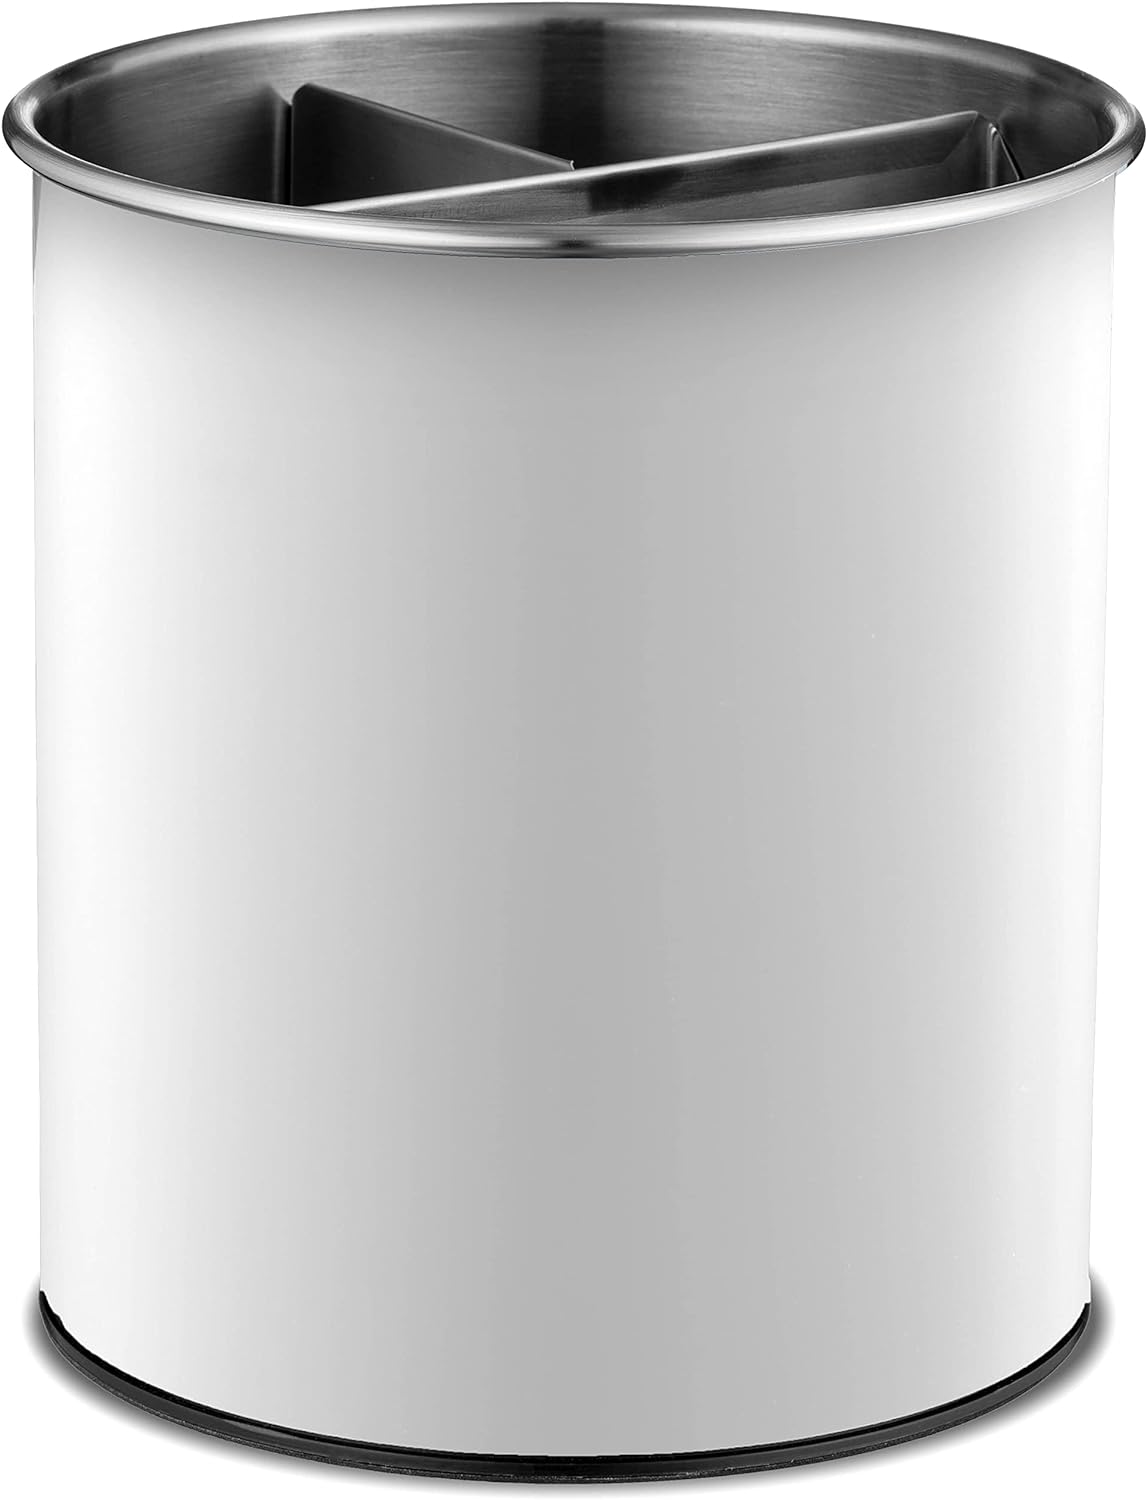 Rotating Utensil Crock with Weighted Base for Stability, Stainless Steel Utensil Caddy with Removable Divider, Fresh White